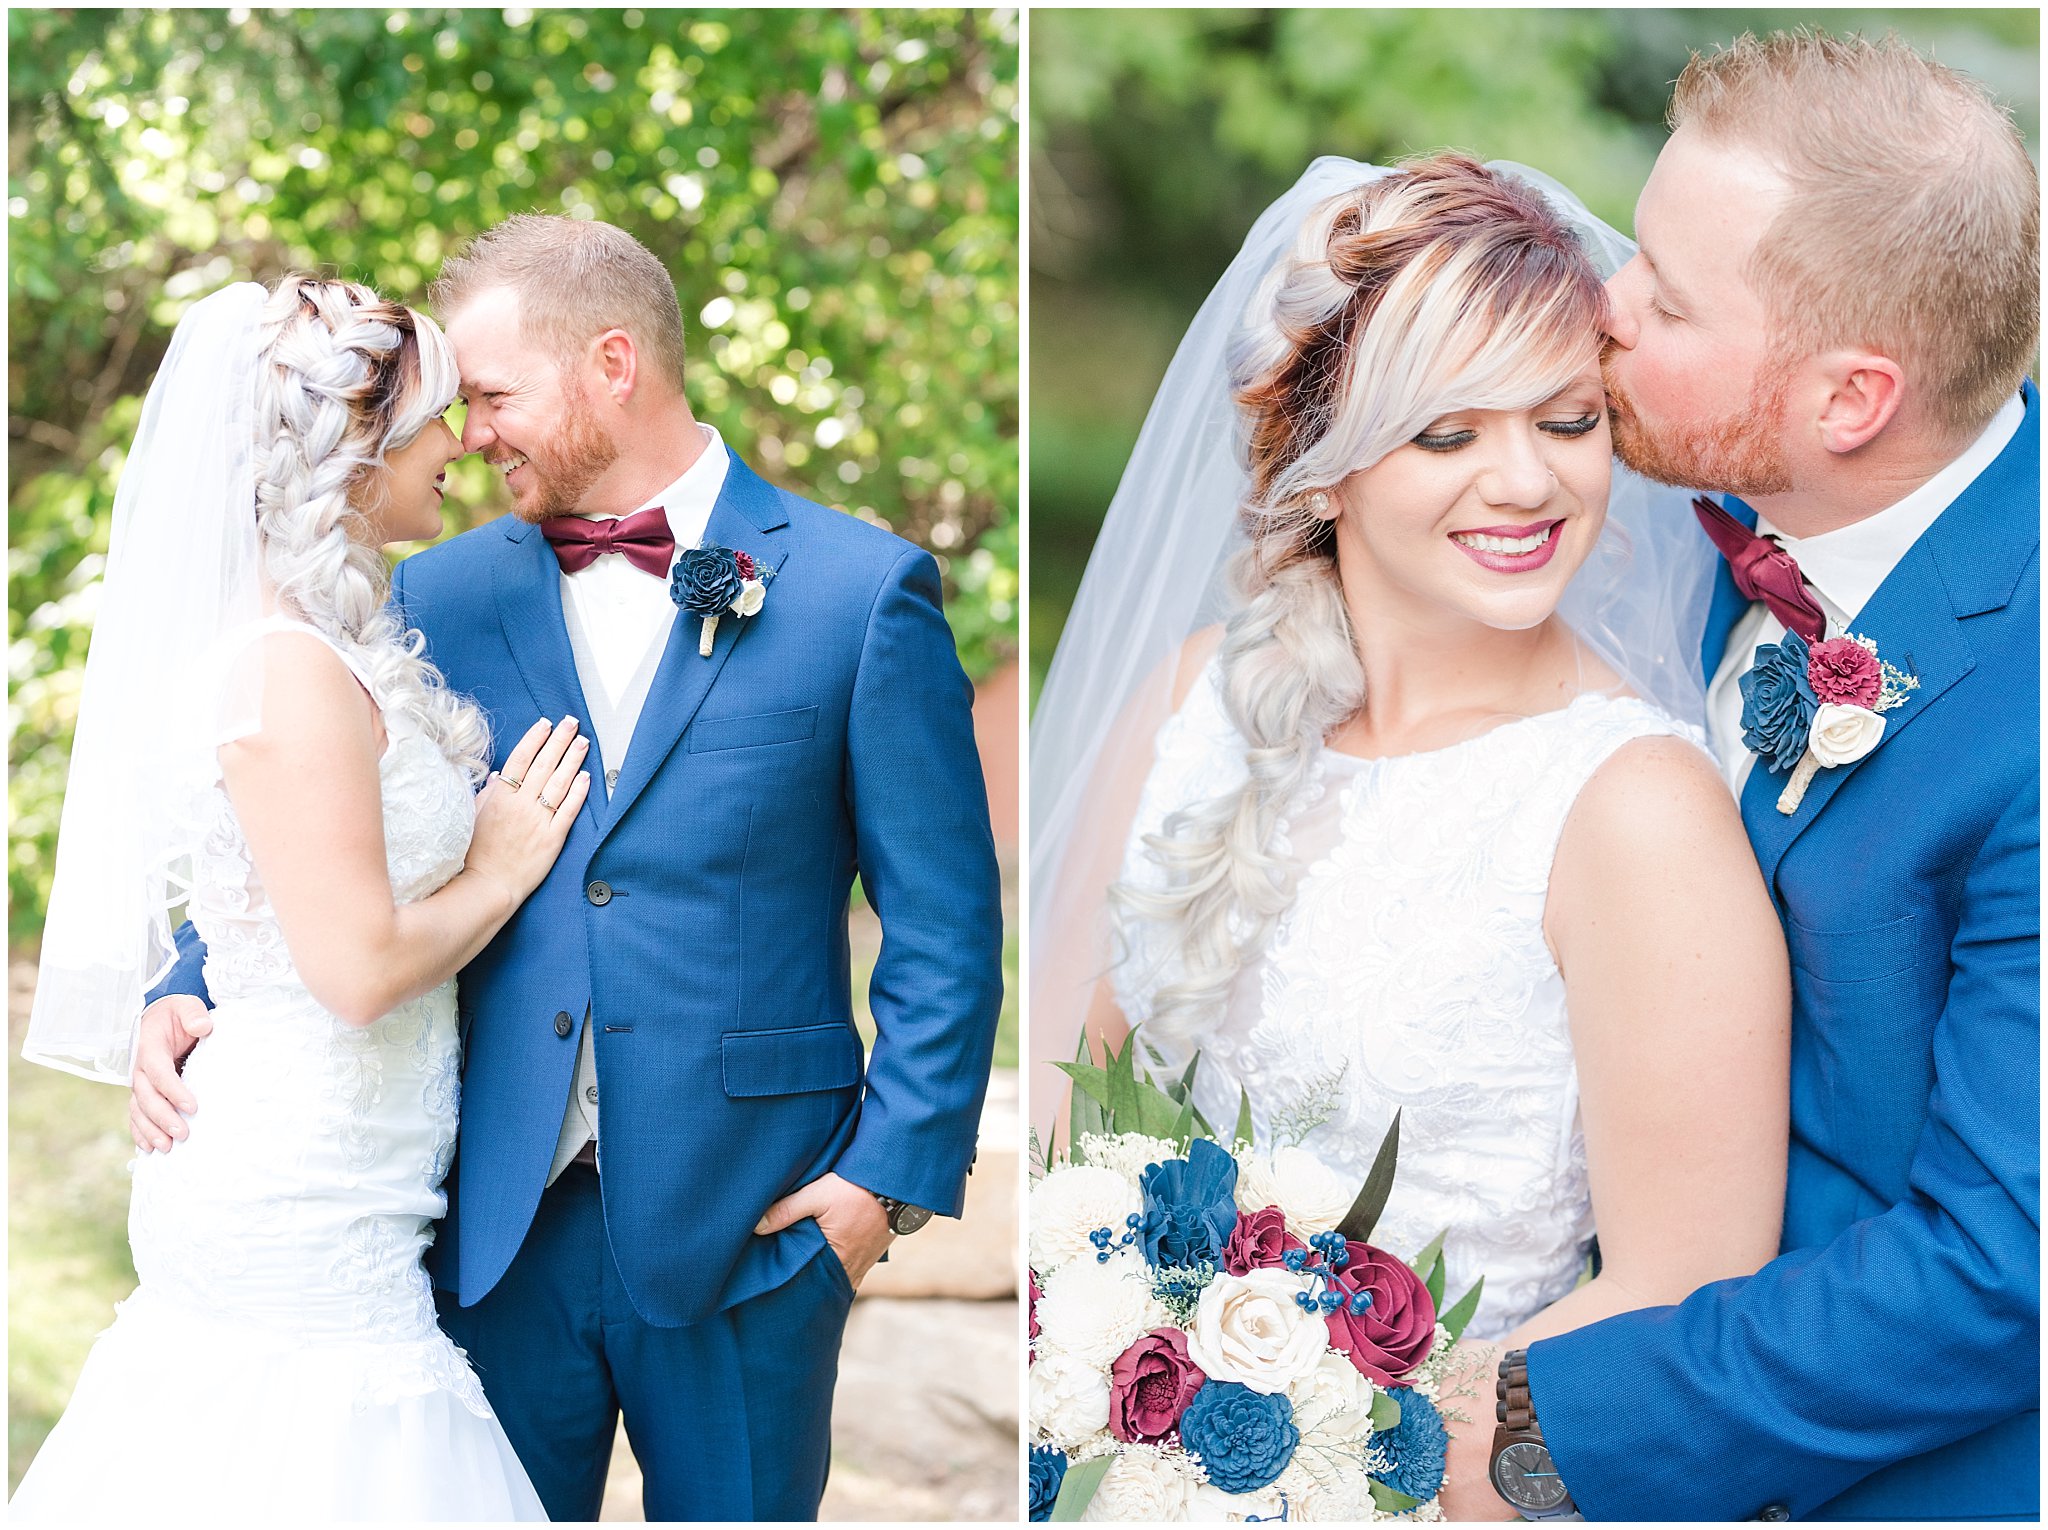 Bride in lace mermaid dress and wooden bouquet, groom in Cornish blue suit and burgundy bow tie portraits on wedding day | Log Haven Summer Mountain Wedding | Jessie and Dallin Photography